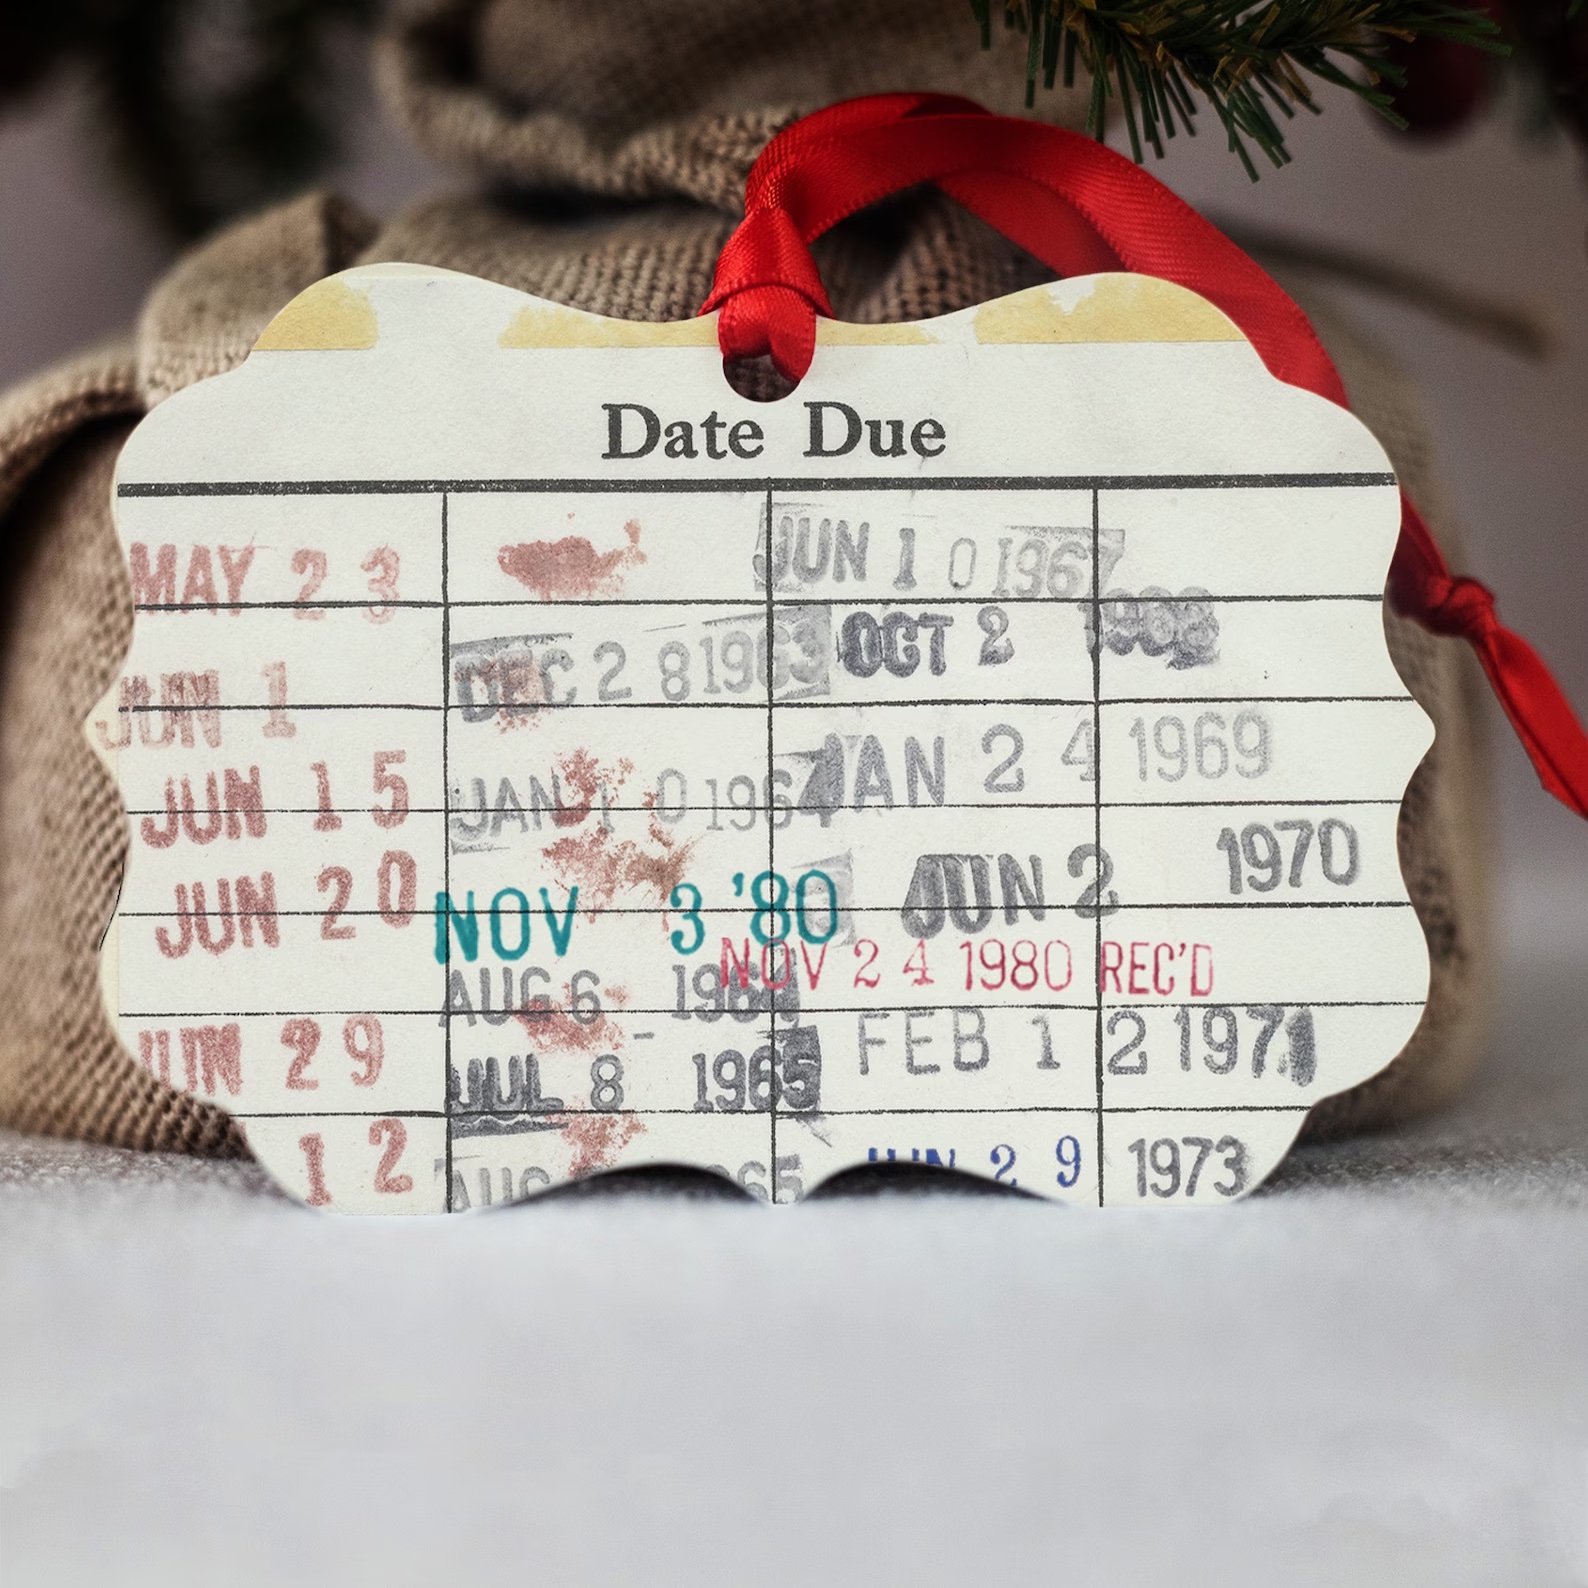 A photo of a ornament in the shape of a used library card full of stamps